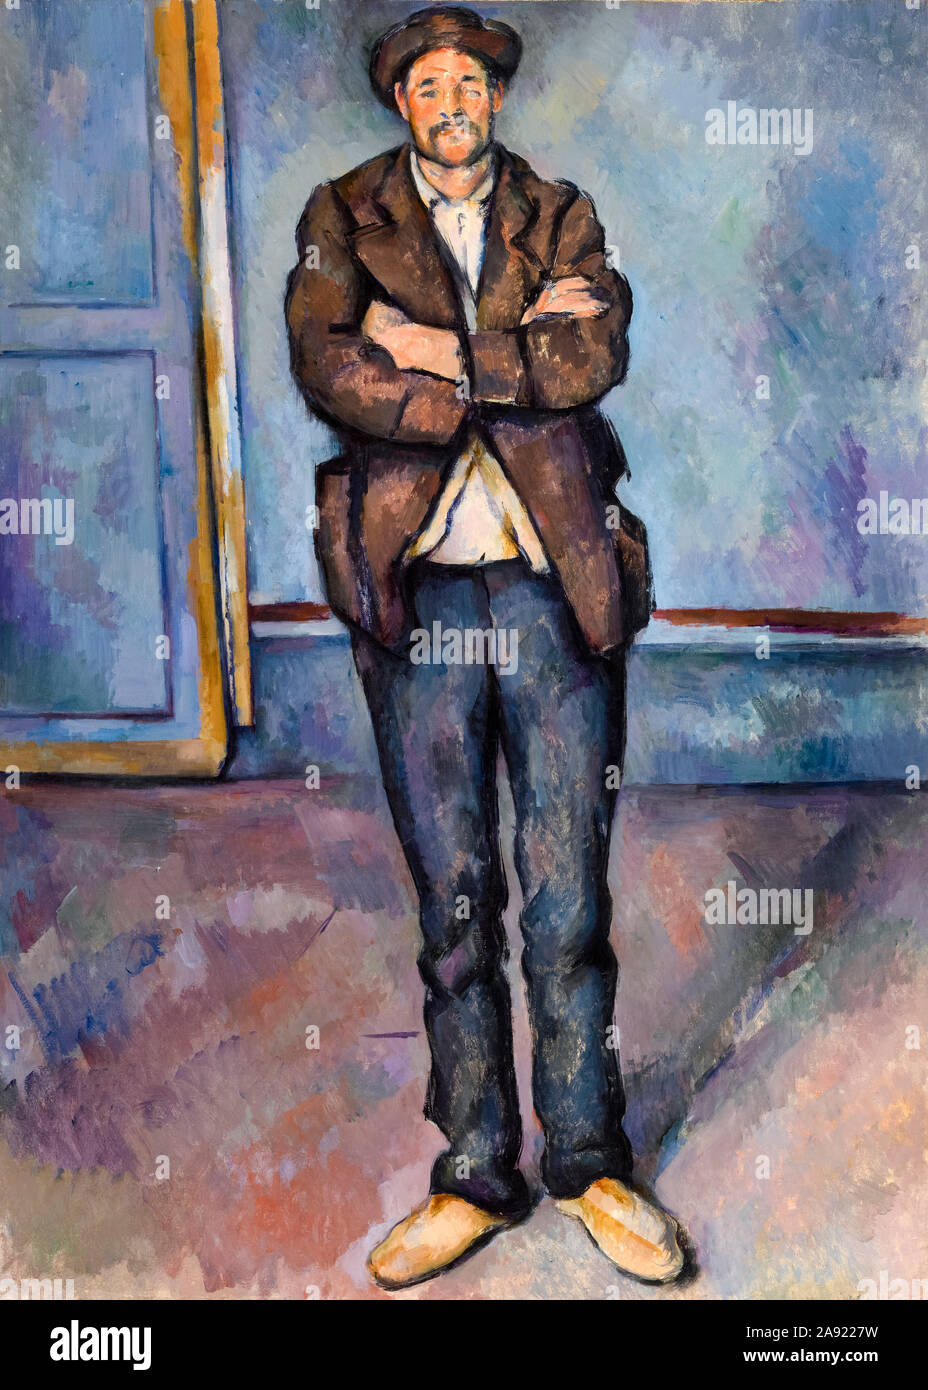 Paul Cezanne, Peasant Standing with Arms Crossed, portrait painting, 1895 Stock Photo